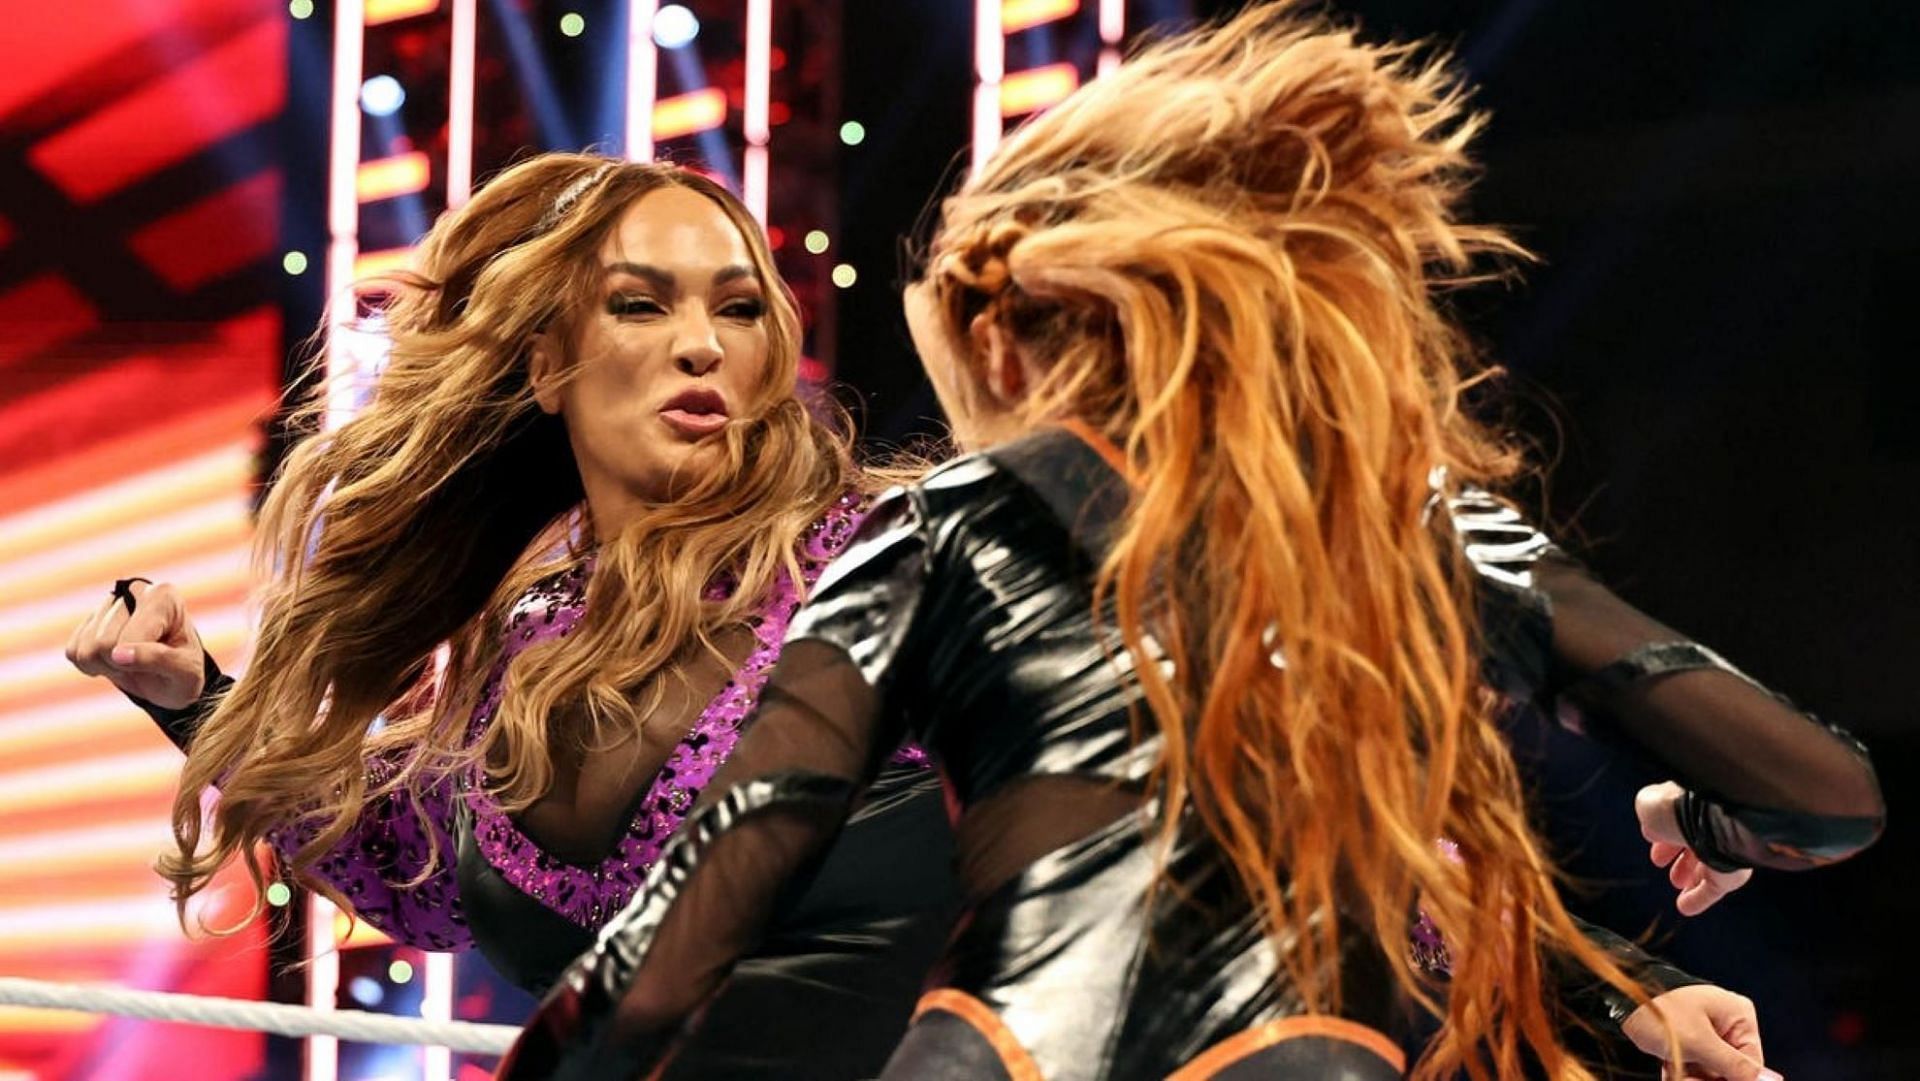 Nia Jax is riding high after her big win over Becky Lynch.